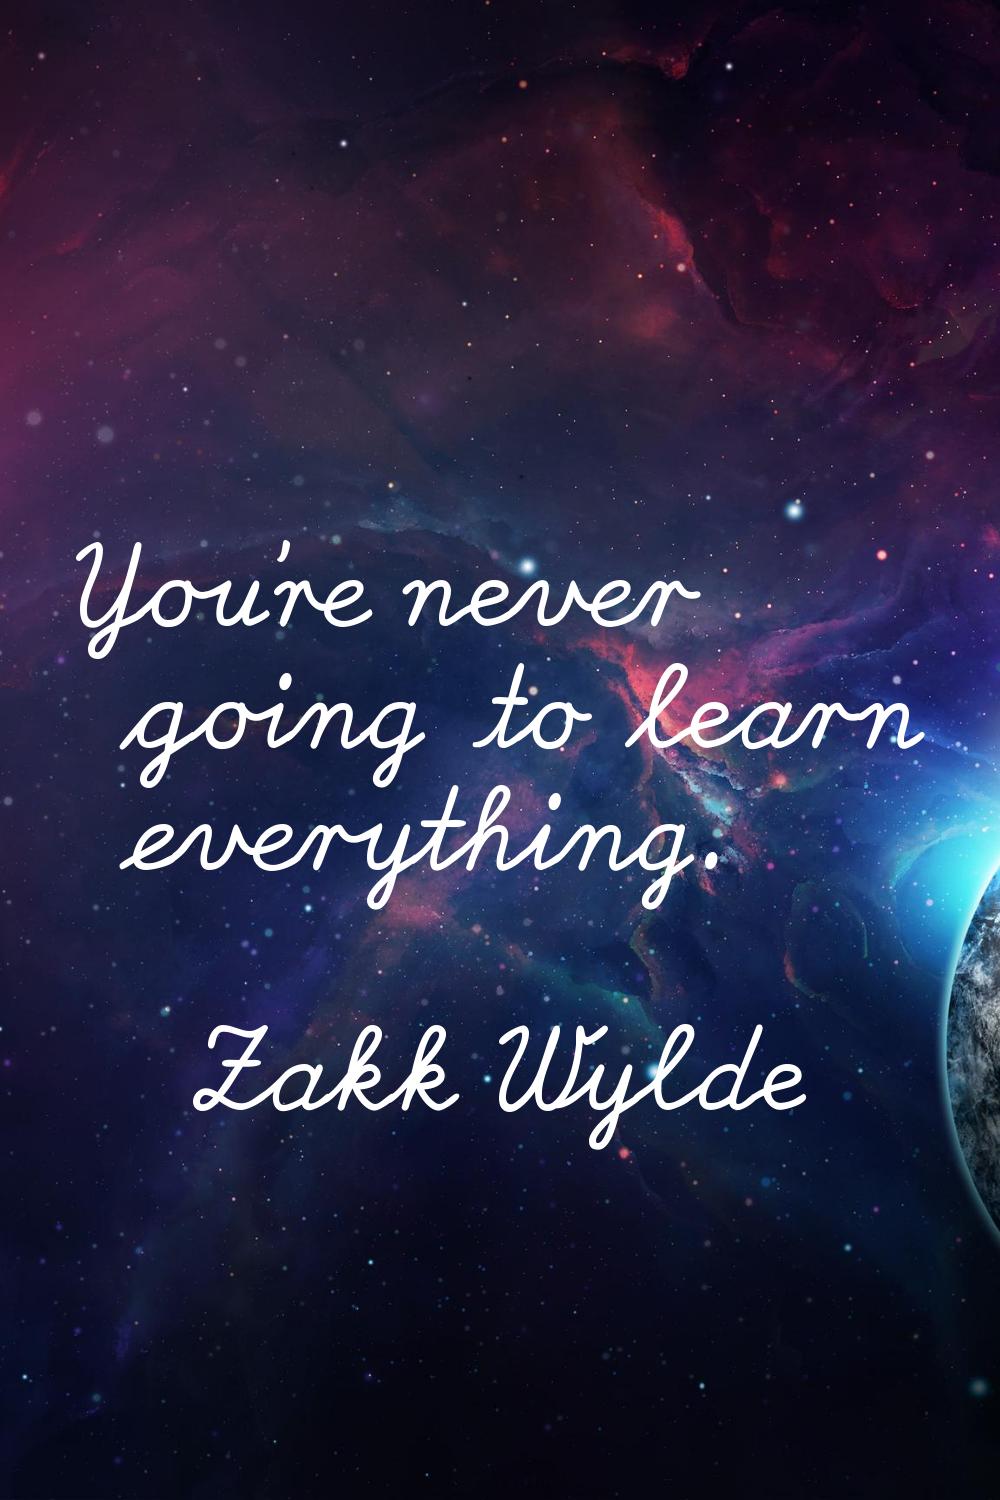 You're never going to learn everything.